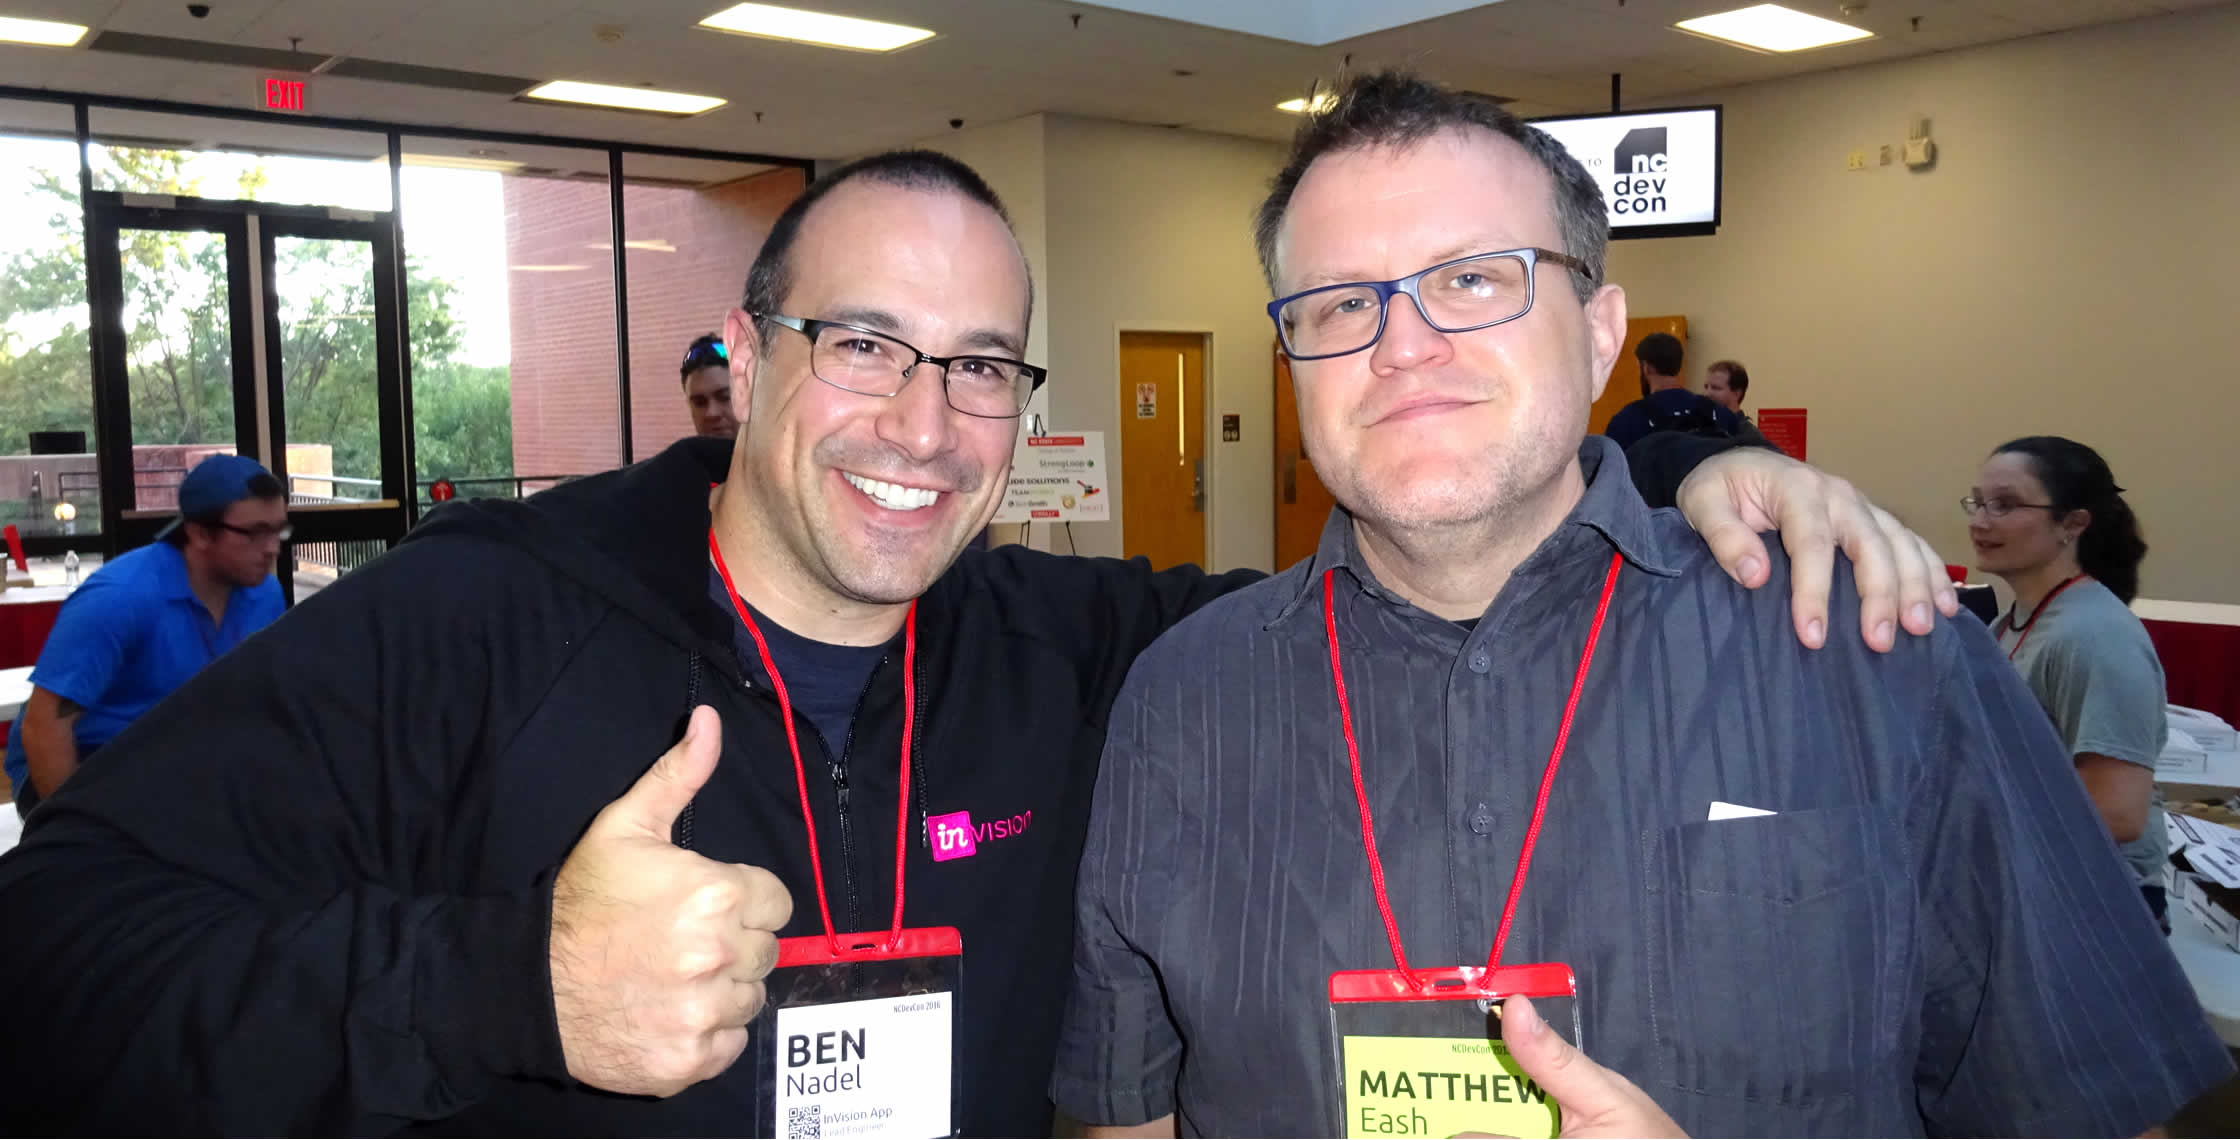 Ben Nadel at NCDevCon 2016 (Raleigh, NC) with: Matthew Eash